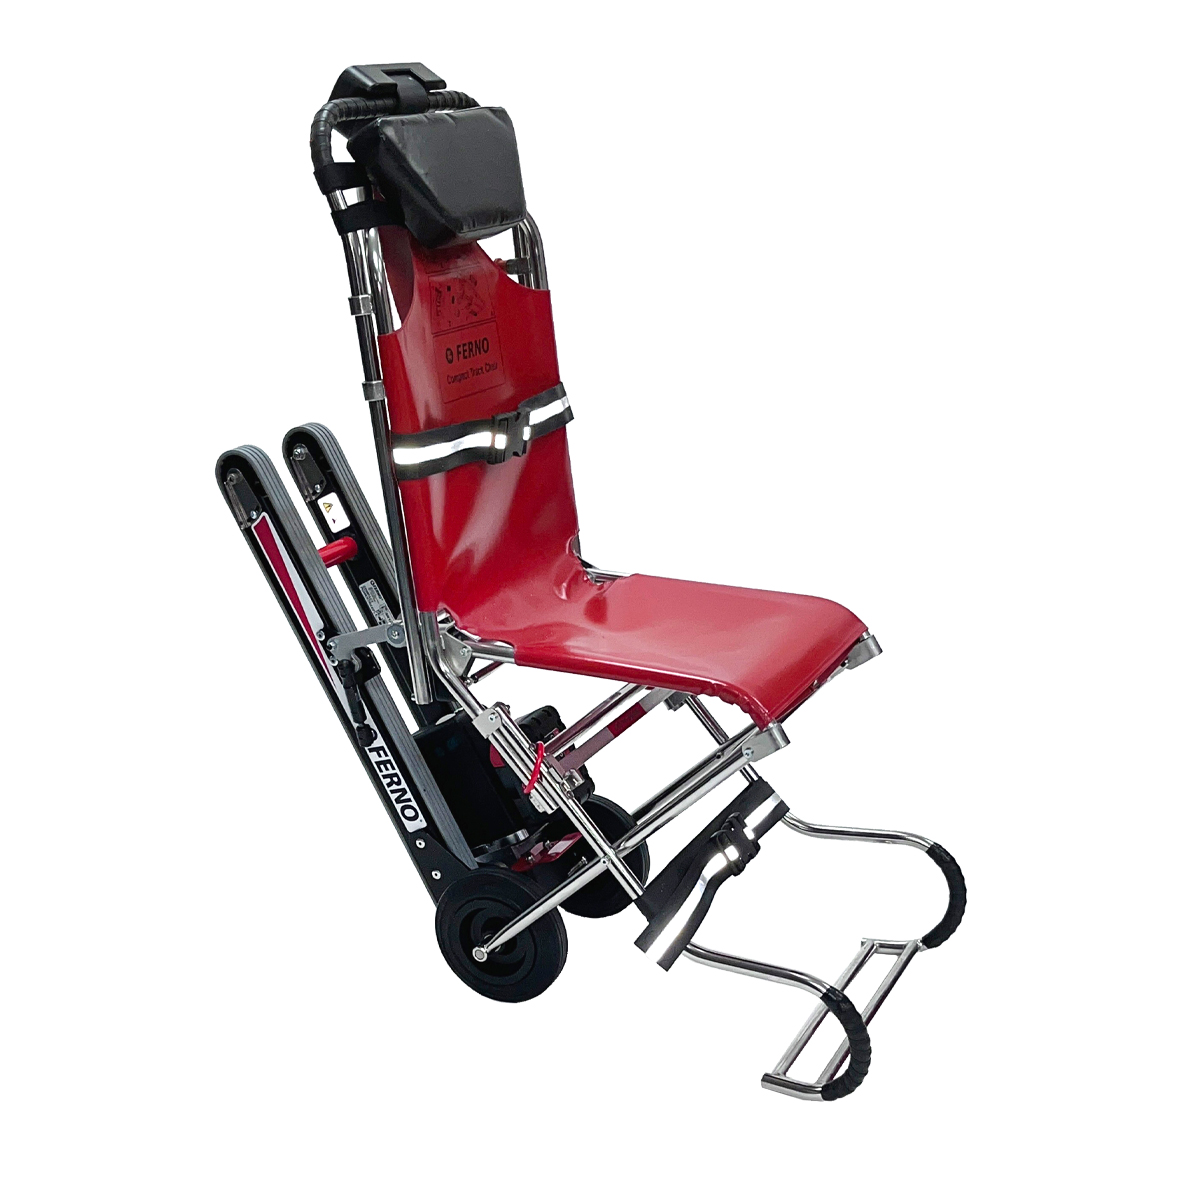 NEW Compact PowerTraxx Chair POWER UP your AMBULANCES